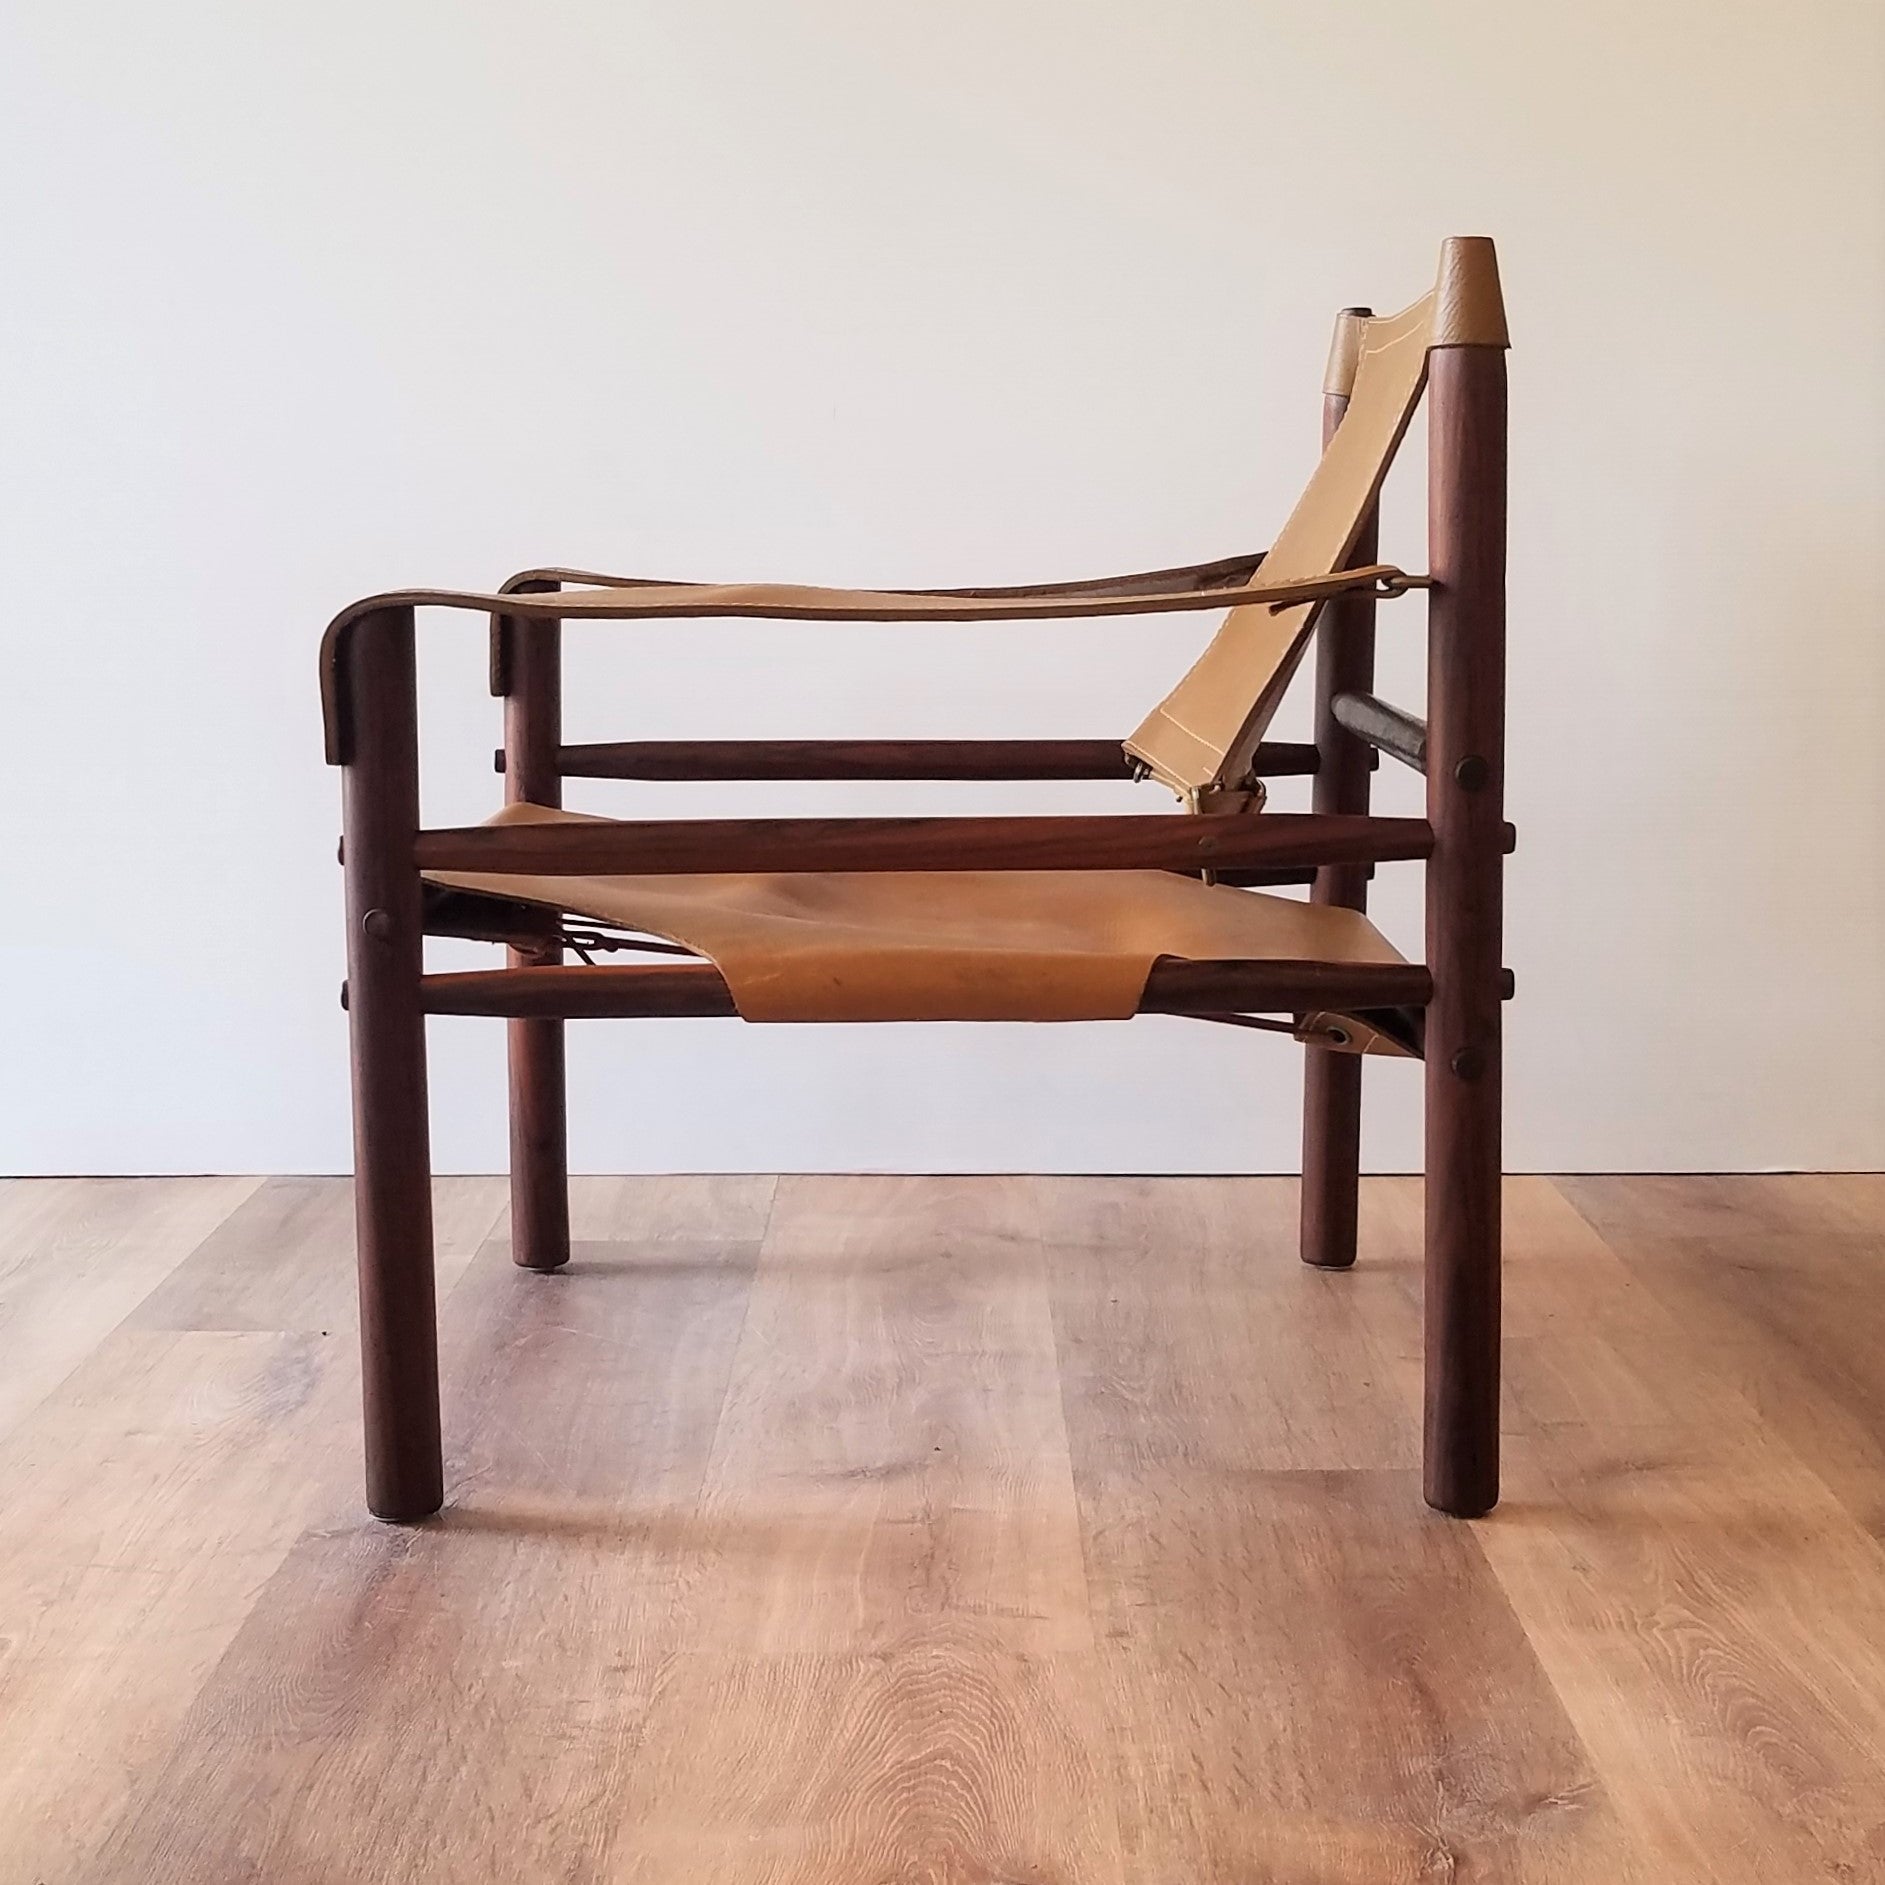 Side View of  Swedish Mid-Century  'Sirocco' Safair Lounge Chair by Arne Norell for Möbel AB, Sweden in Seattle, Washington.